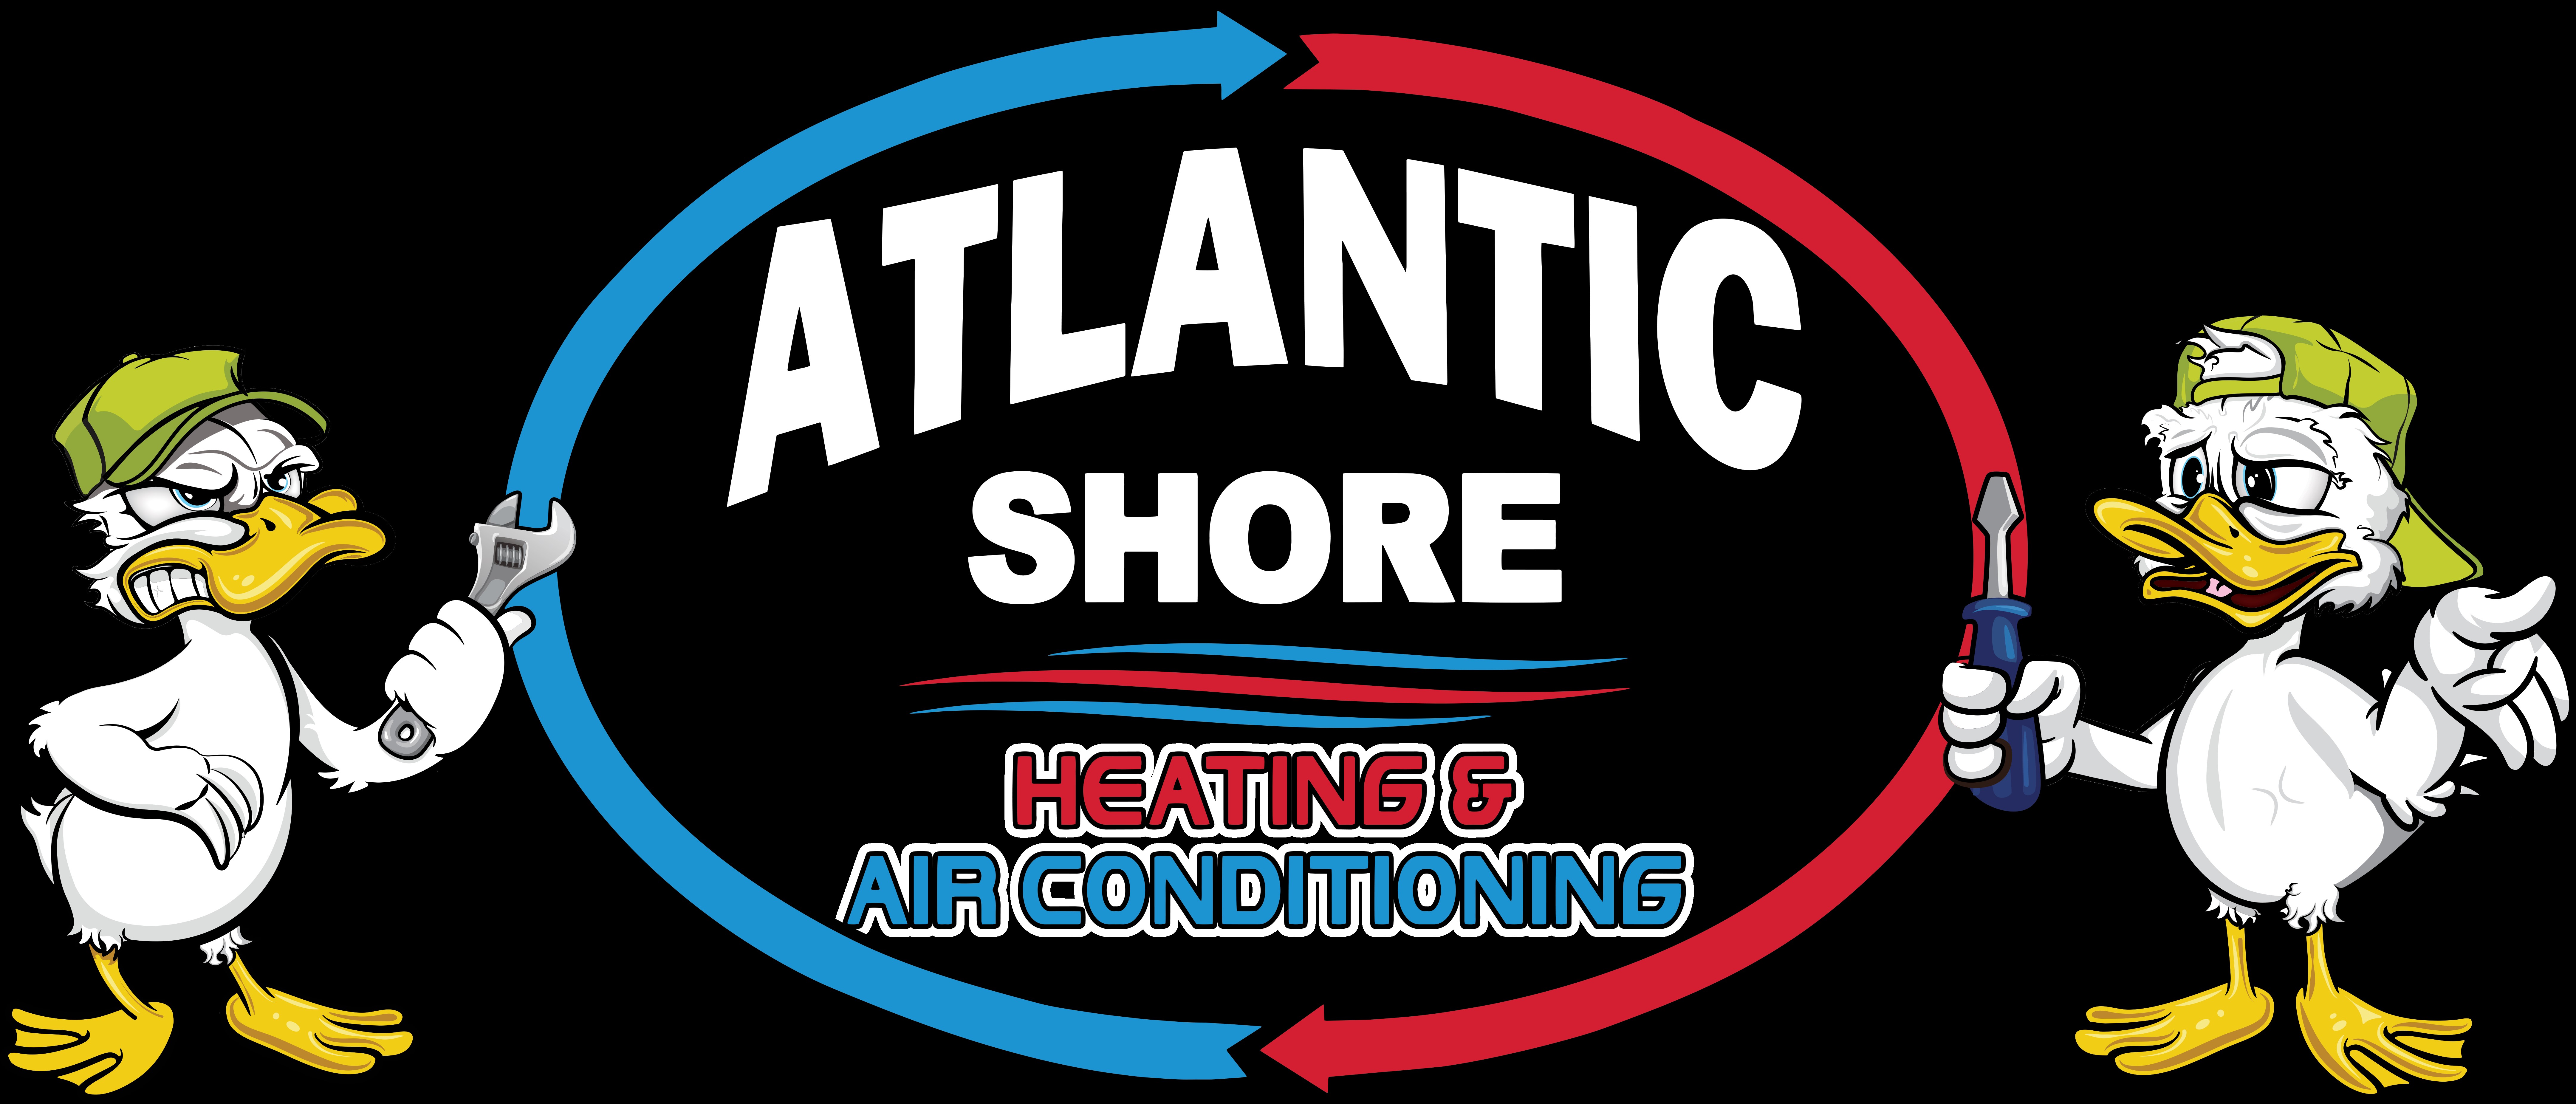 Atlantic Shore Heating and Air Conditioning